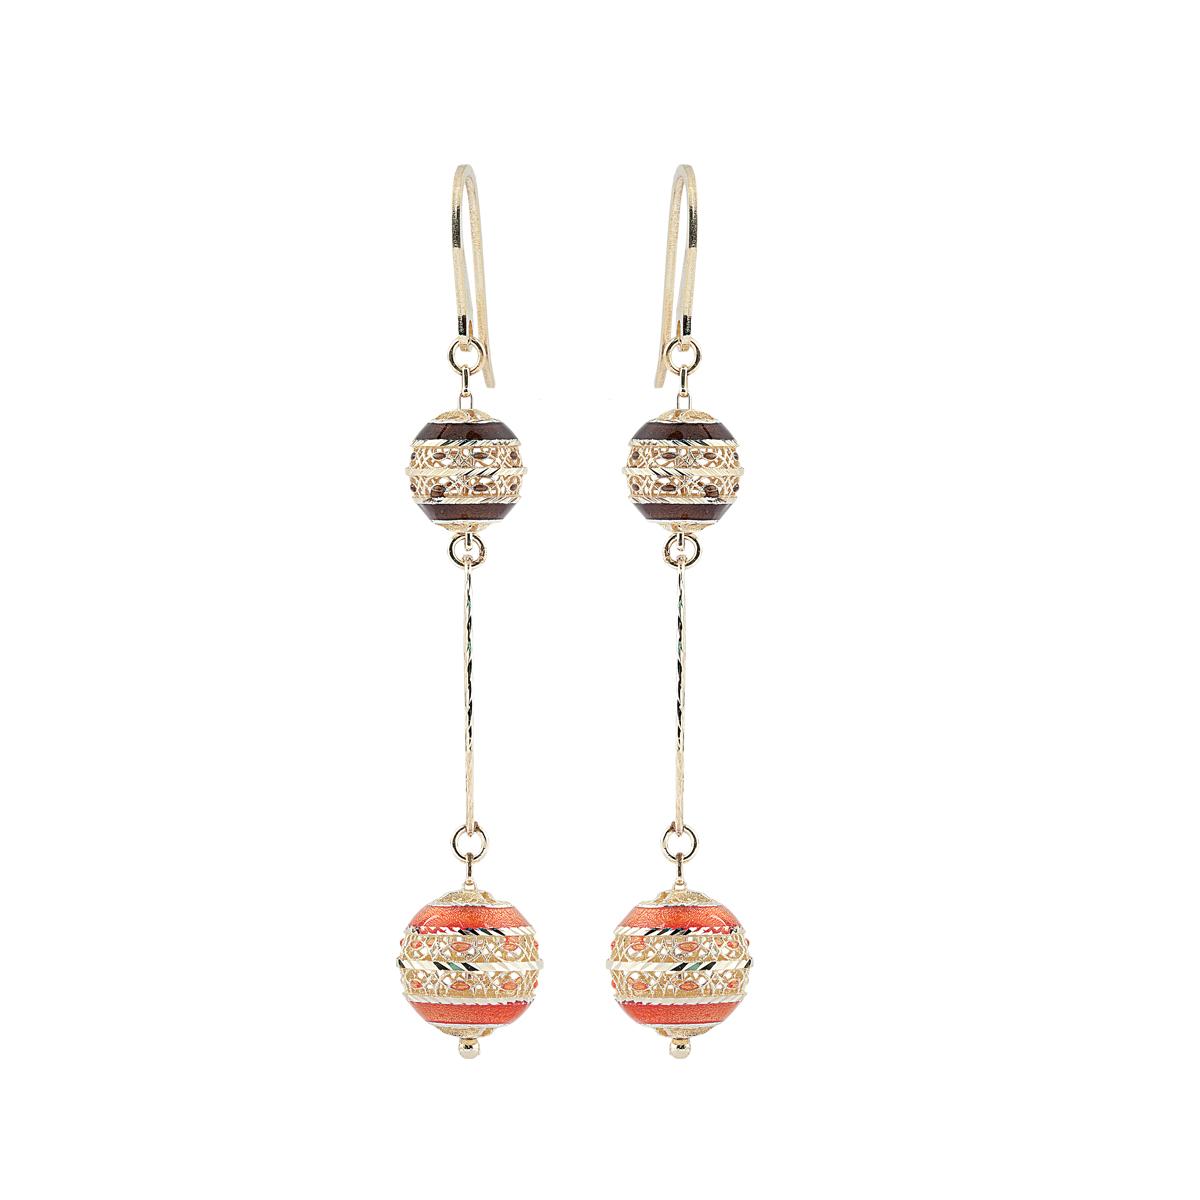 Earrings in 925 silver, gilded and enamelled - ZOR1101-MG